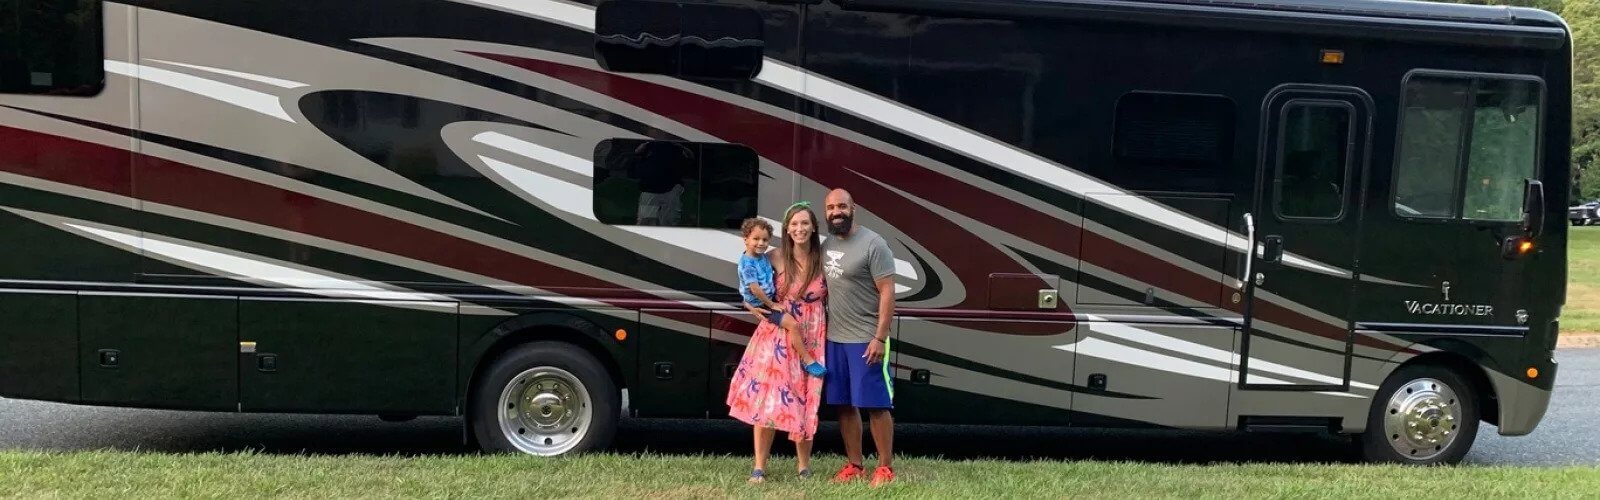 You Just Bought an RV…Now What